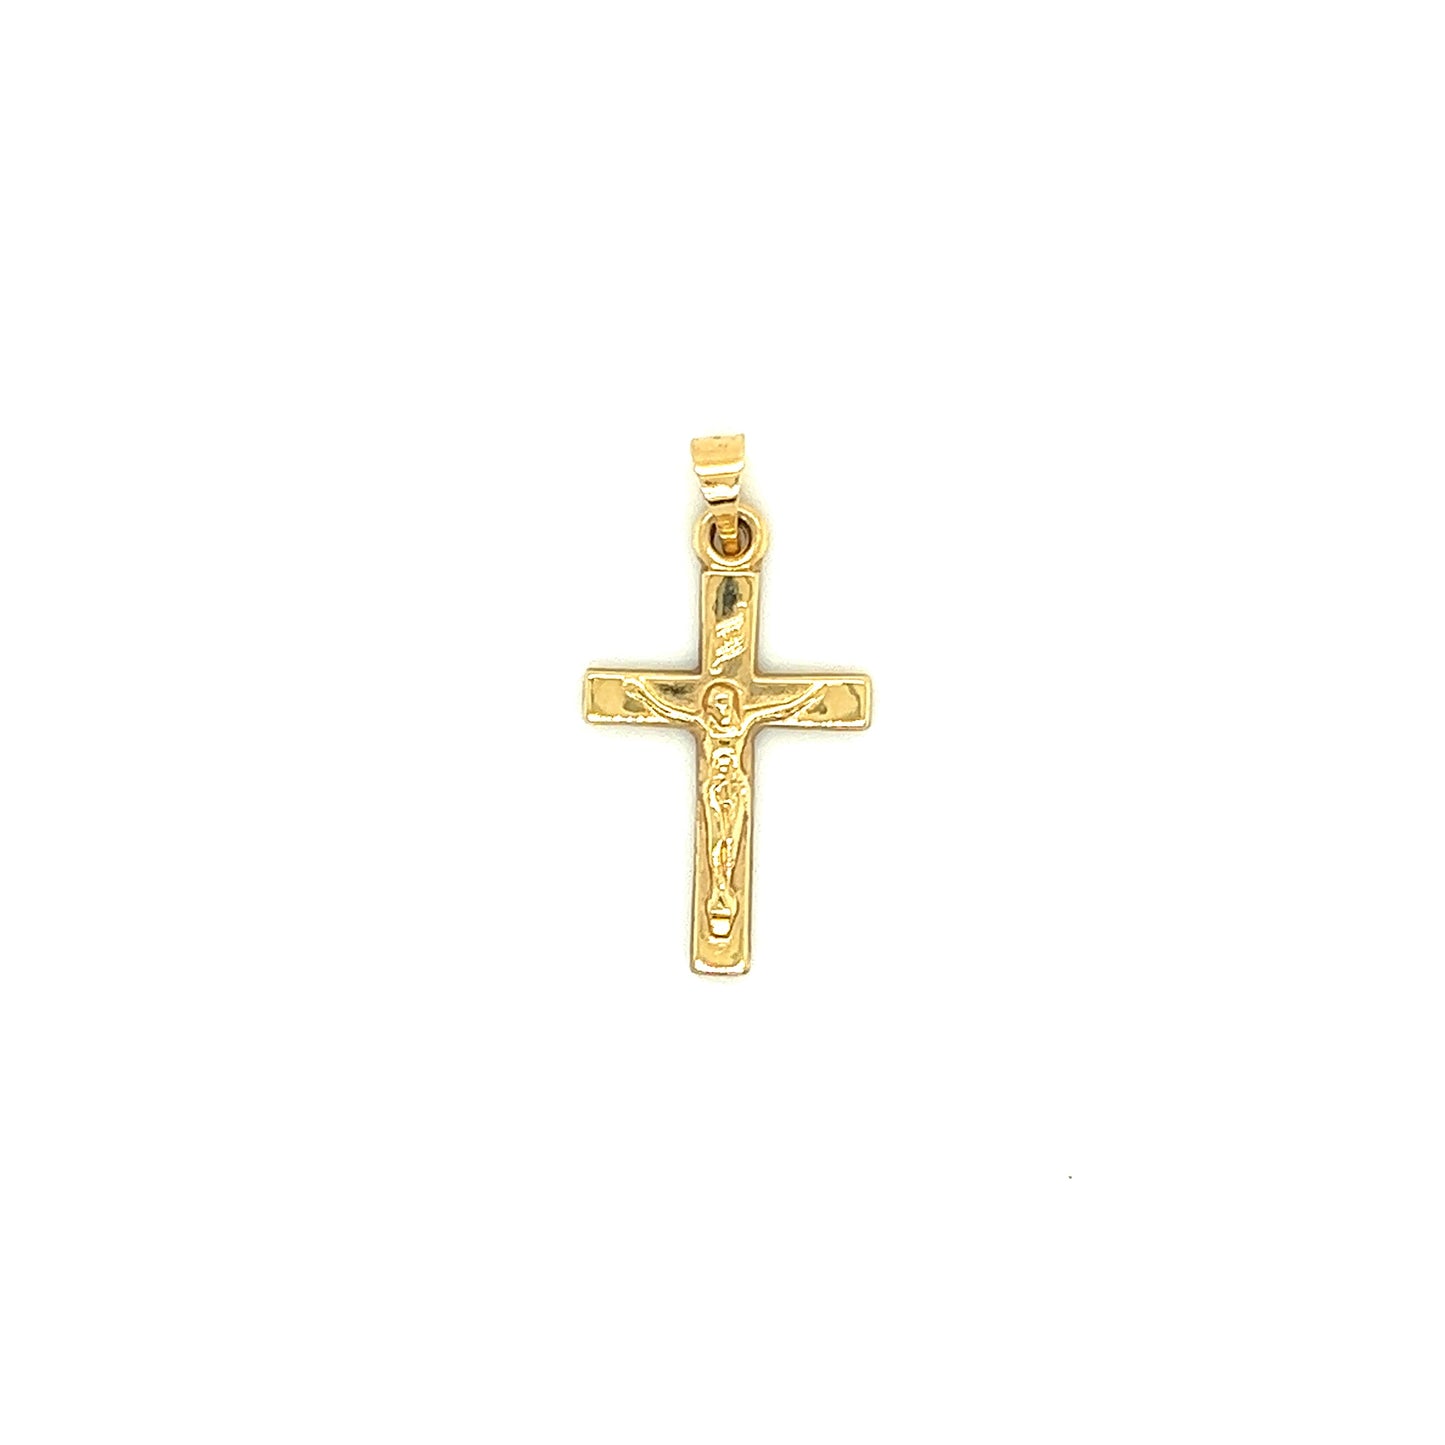 Small Crucifix Pendant in 14K Yellow Gold Pendant Front View